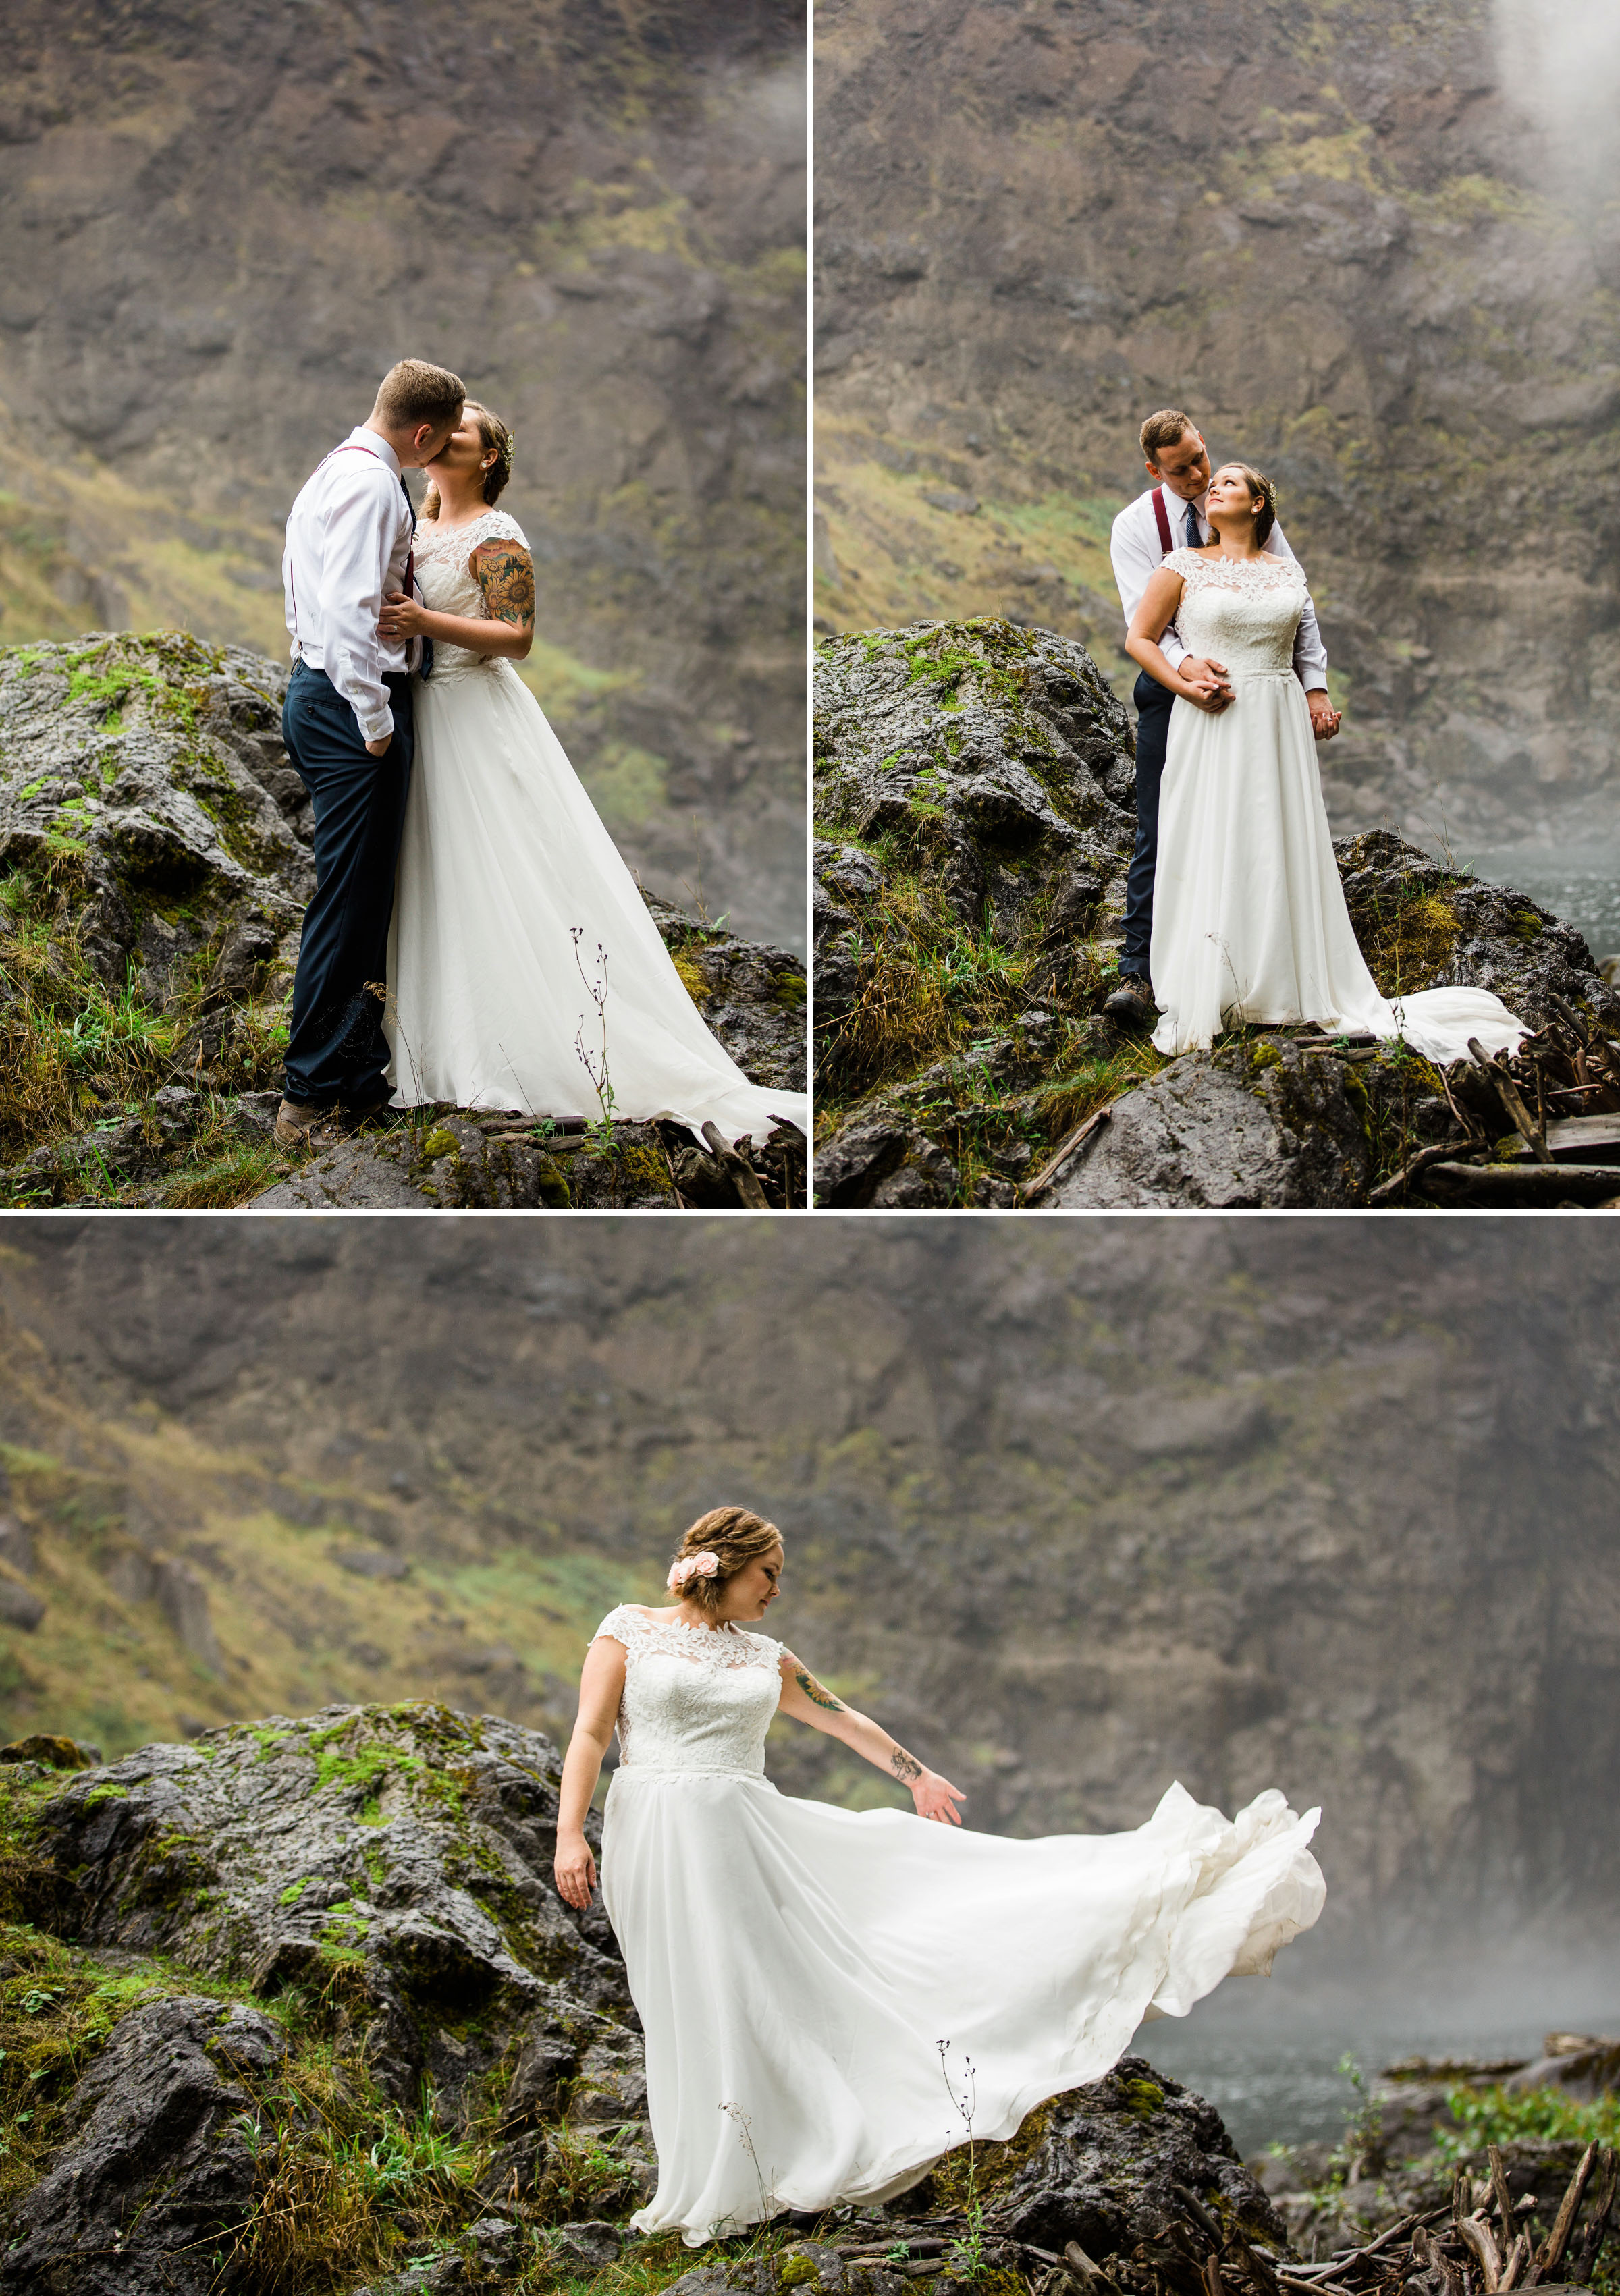 16-Seattle-Elopement-Photographer-Snoqualmie-Pass-Water-Falls-Hiking-Adventure-Wedding-Photography